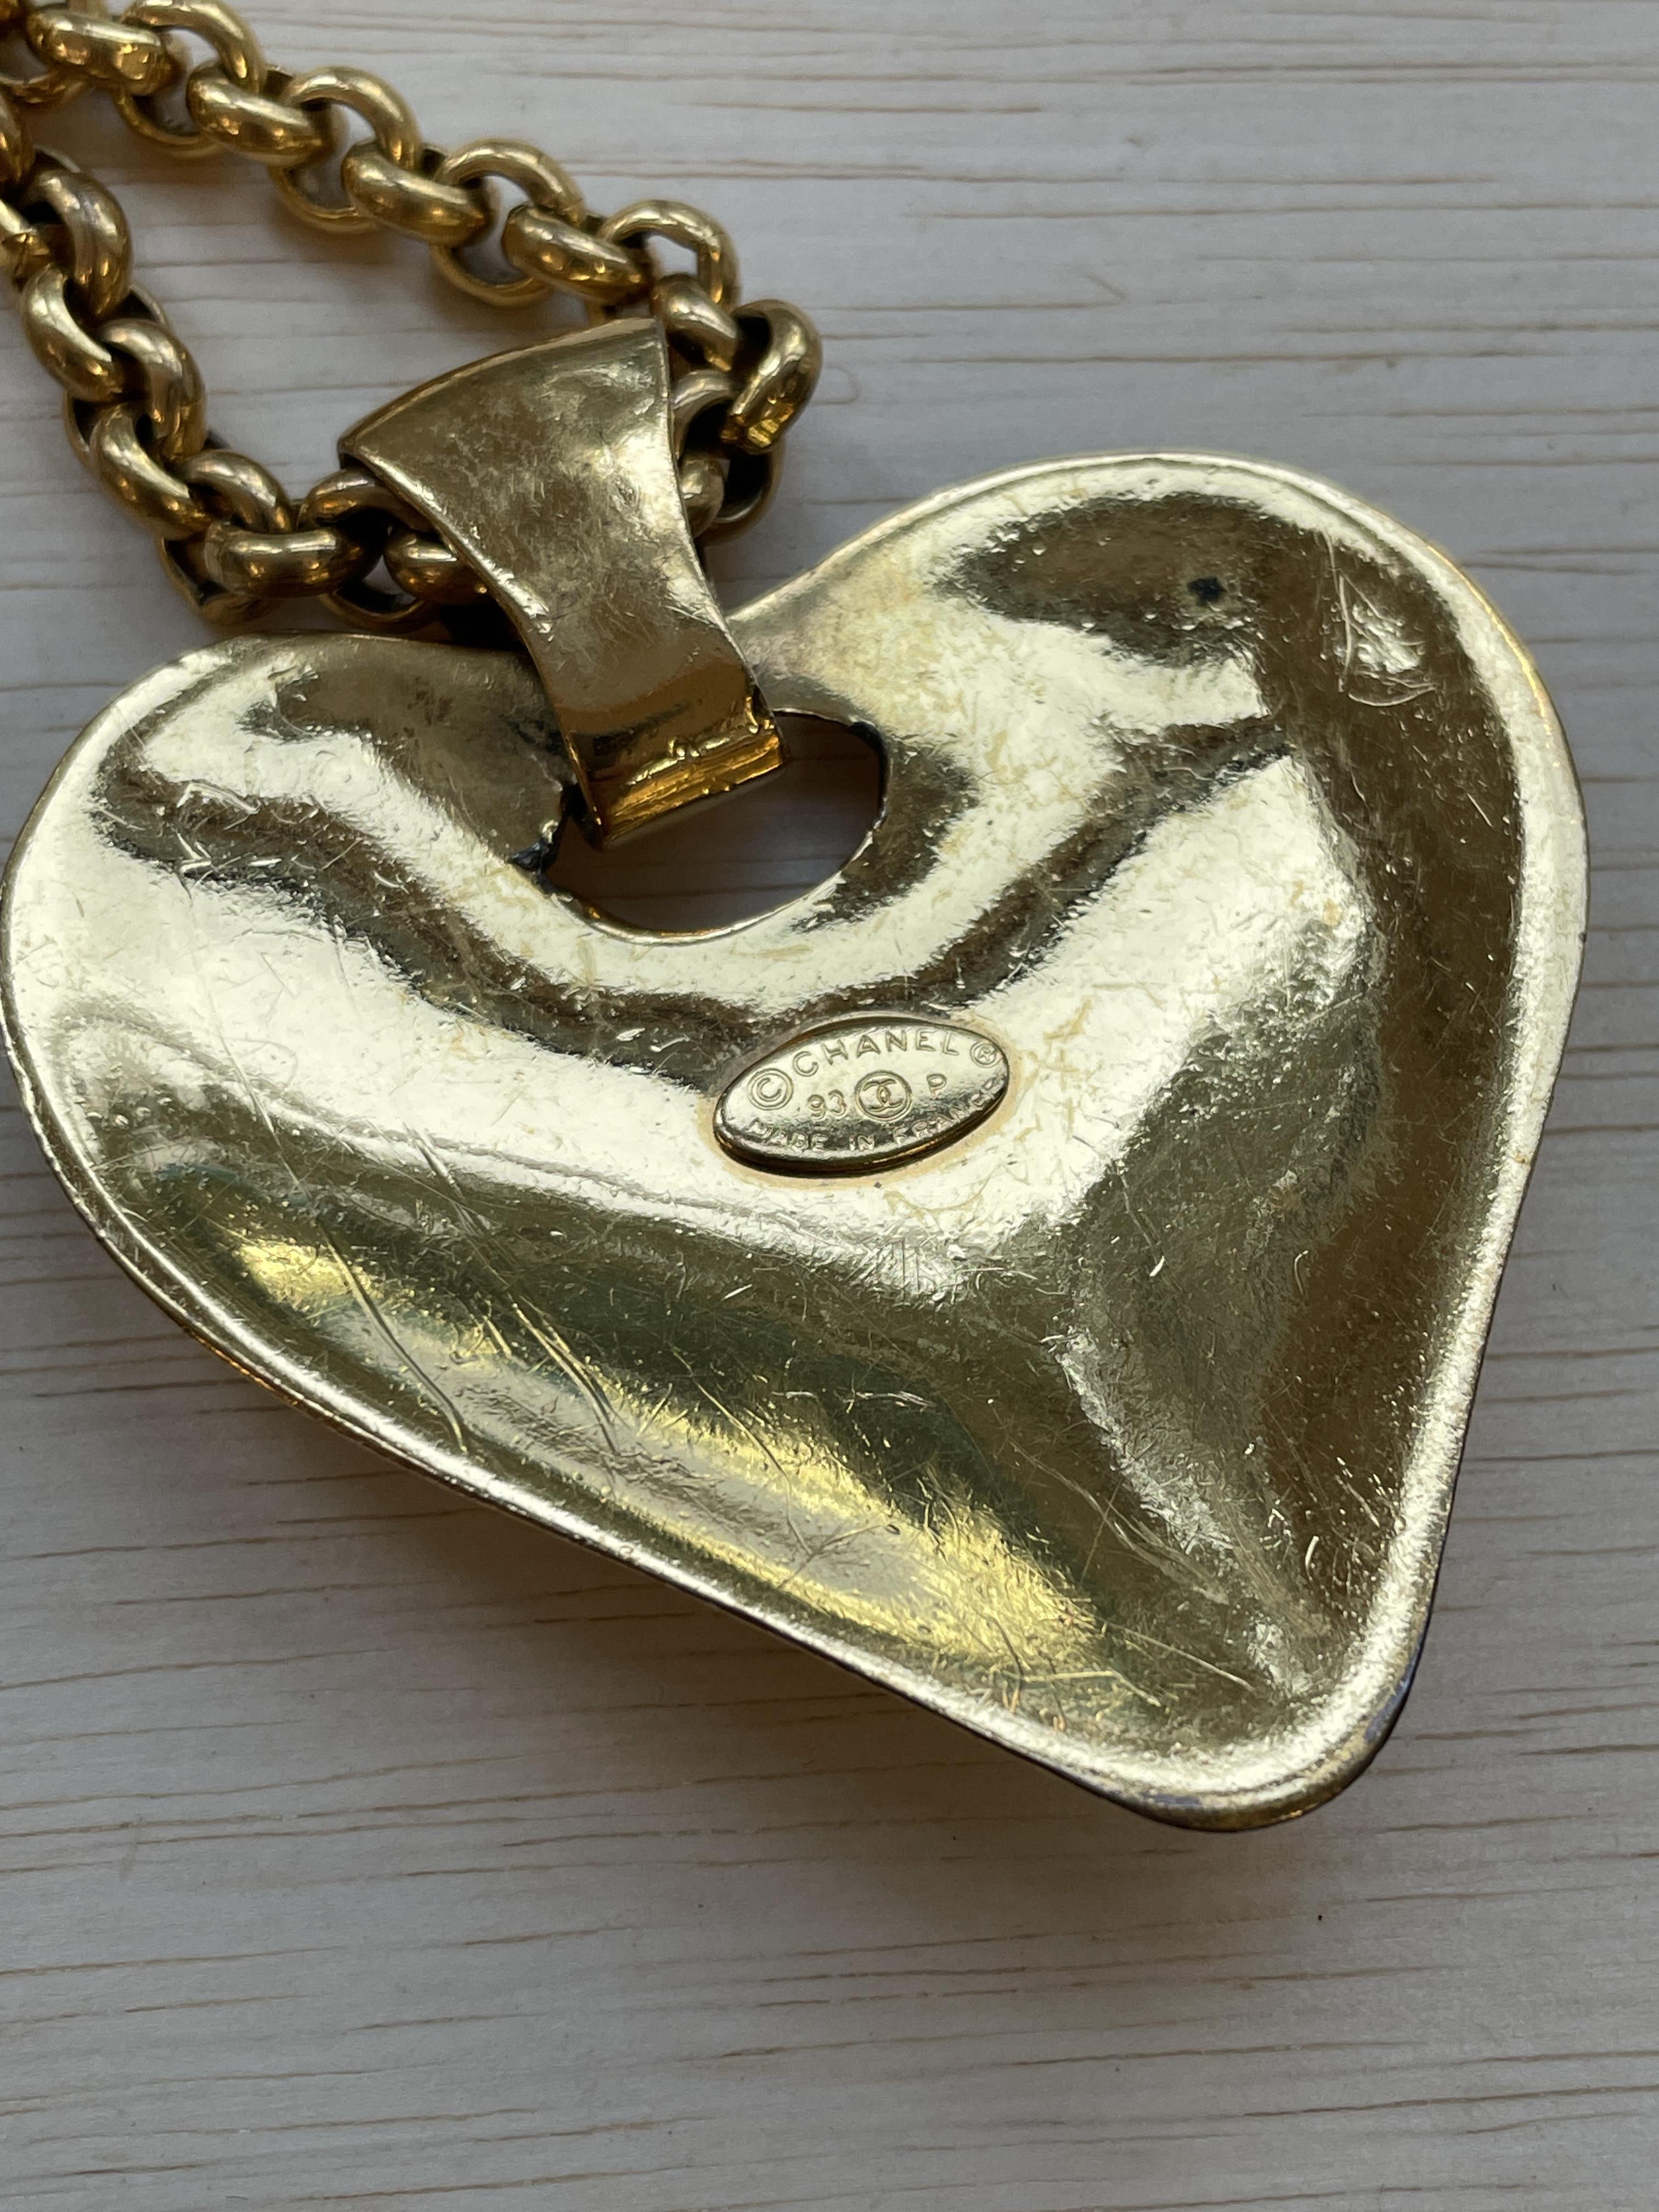 A CHANEL CC HEART PENDANT NECKLACE - Image 5 of 9